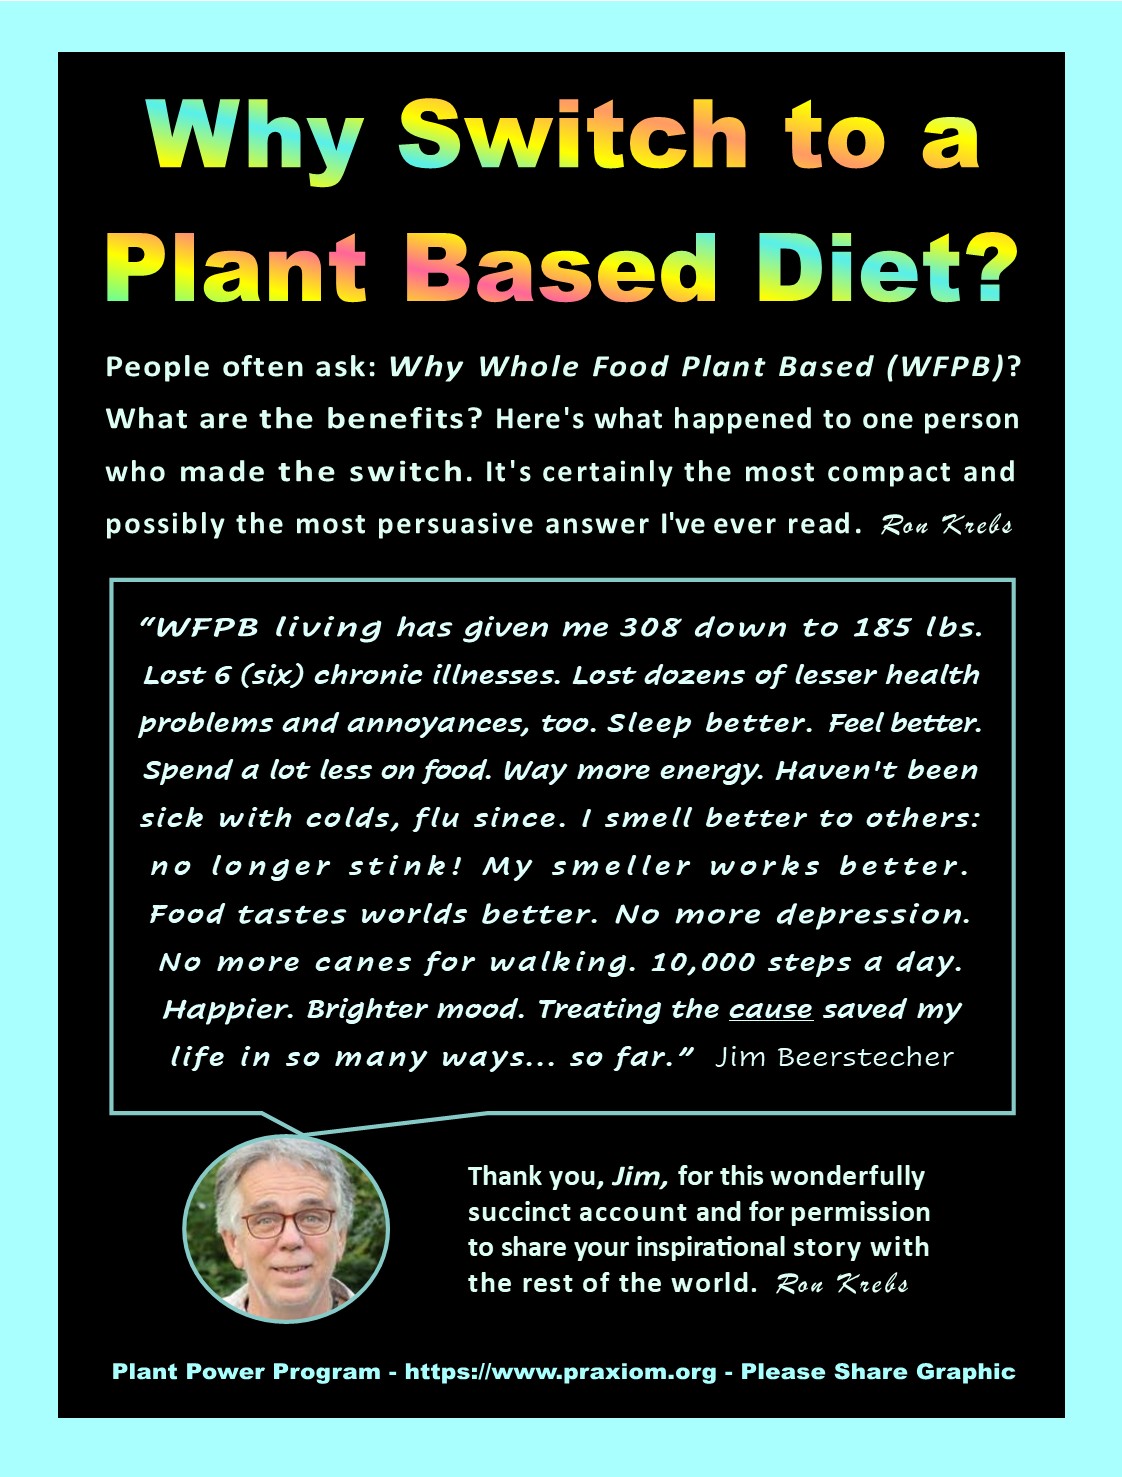 Why Switch to a Plant Based Diet by Jim Beerstecher